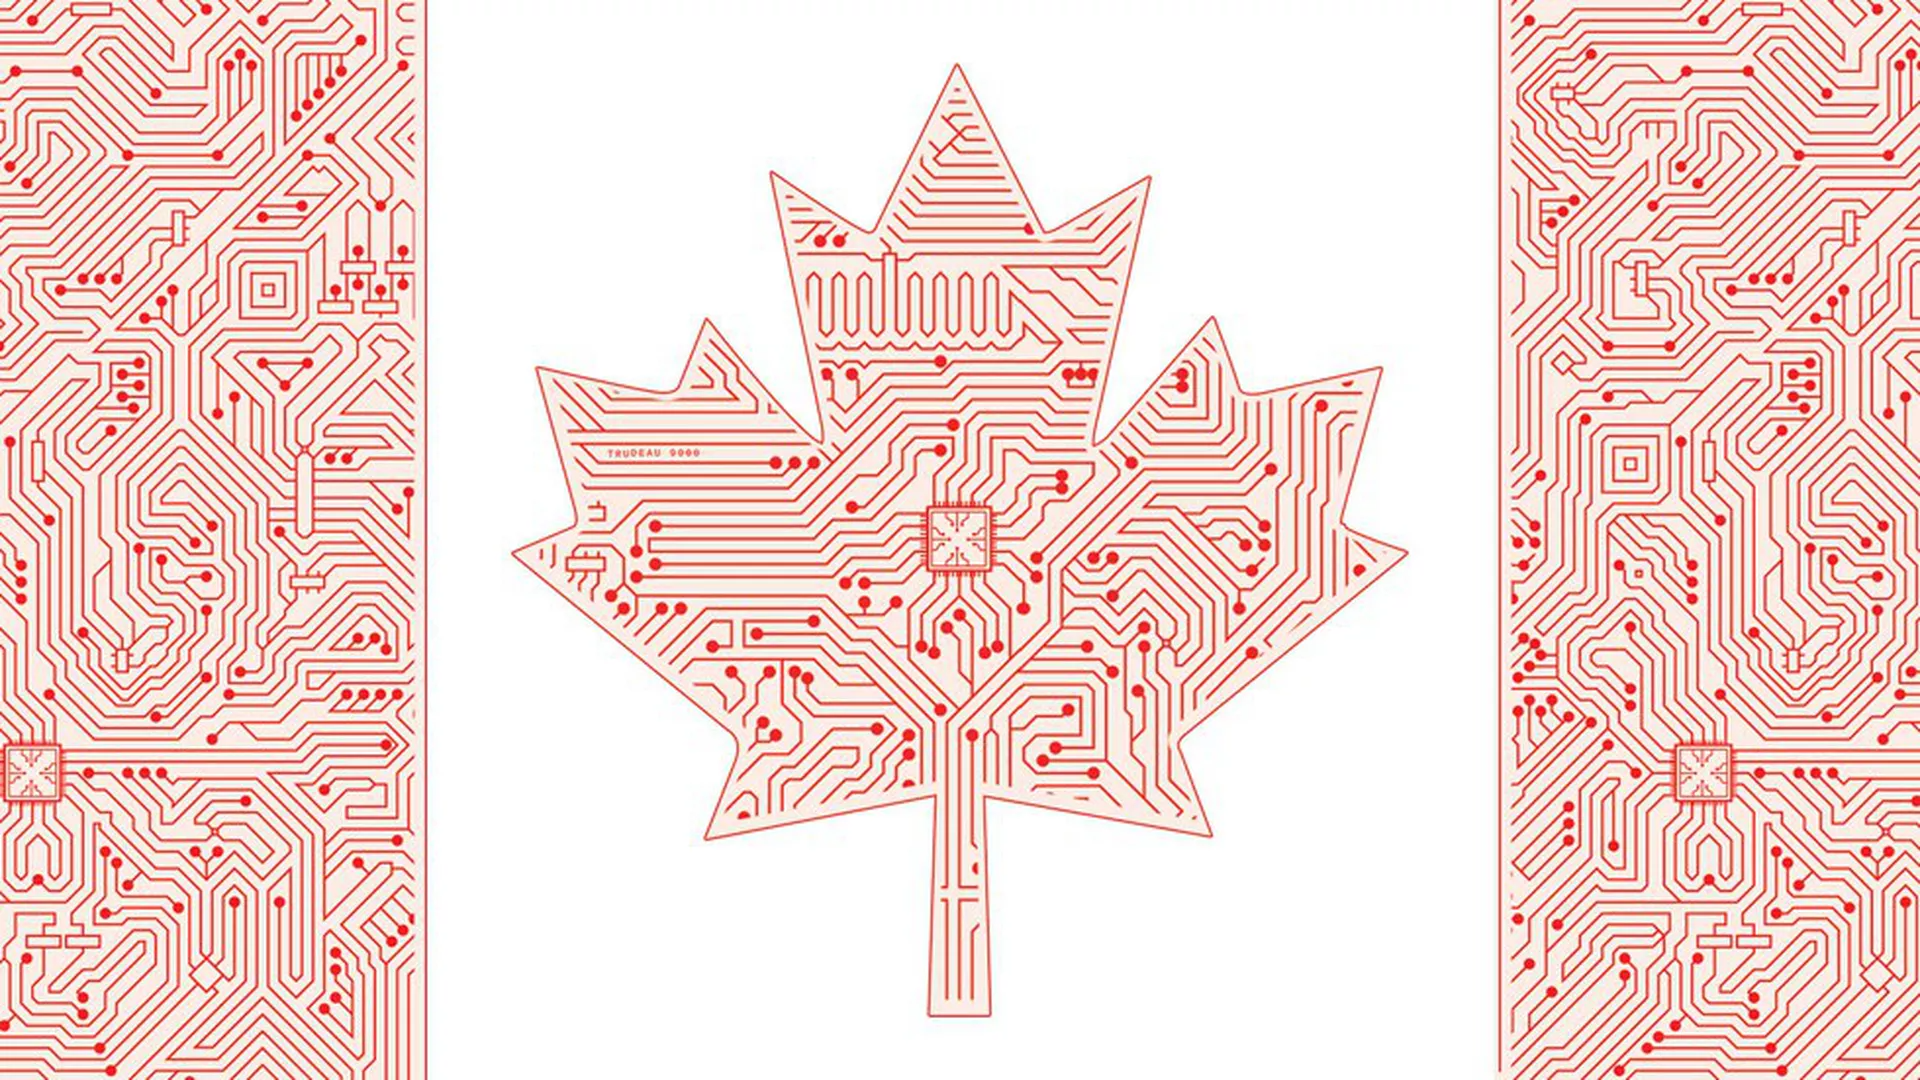 An illustration of the Canadian flag made of electronic circuitry